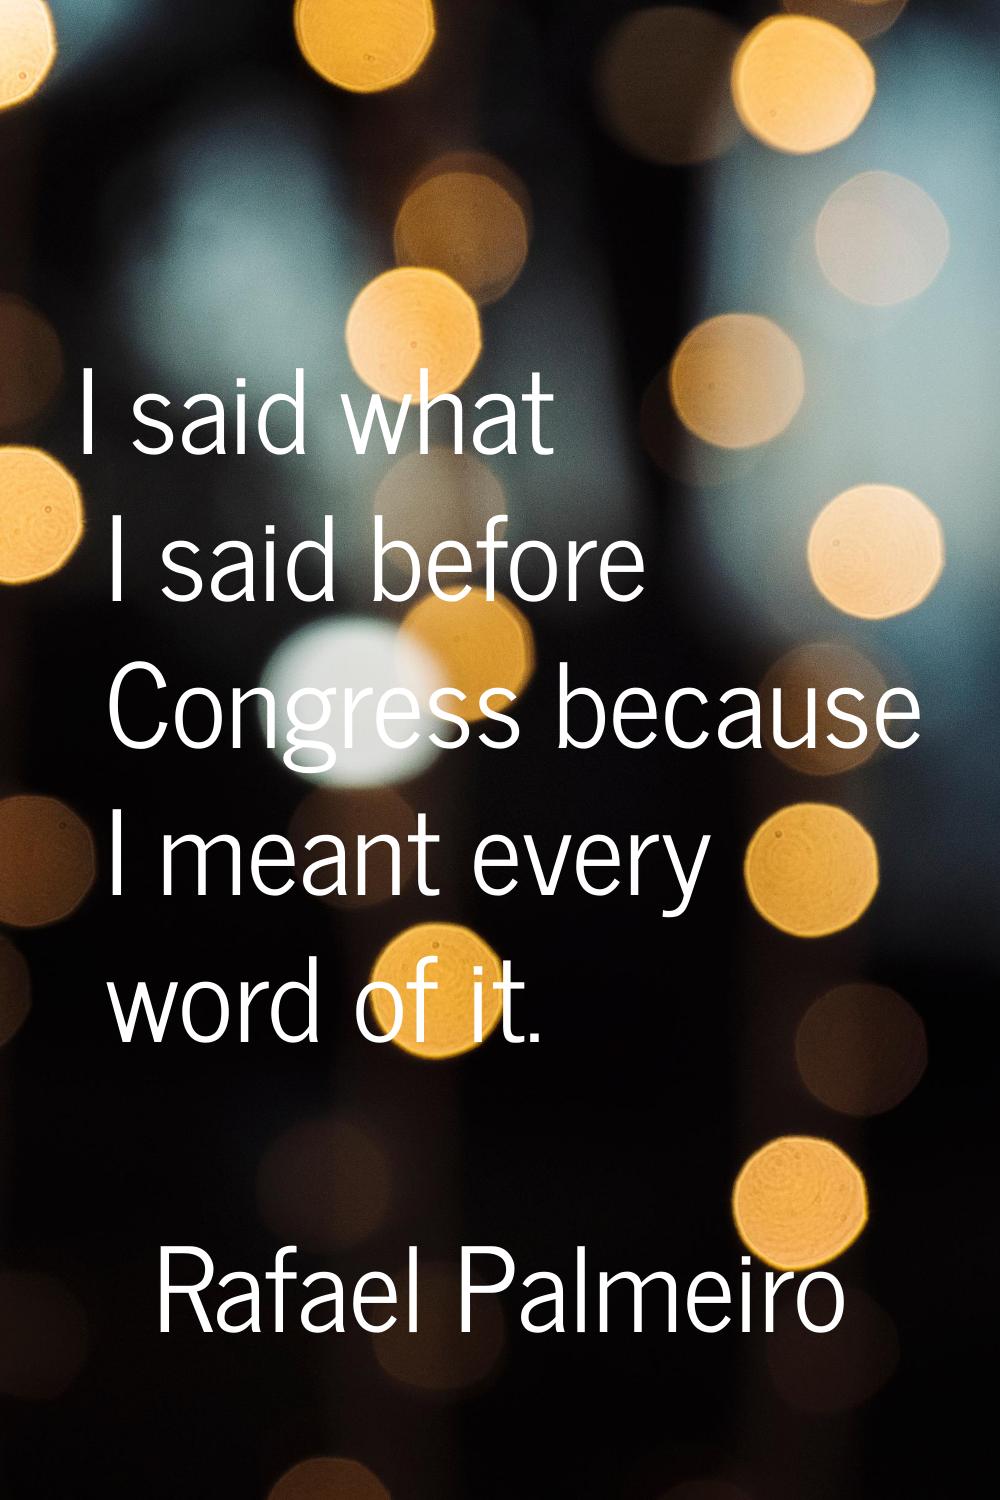 I said what I said before Congress because I meant every word of it.